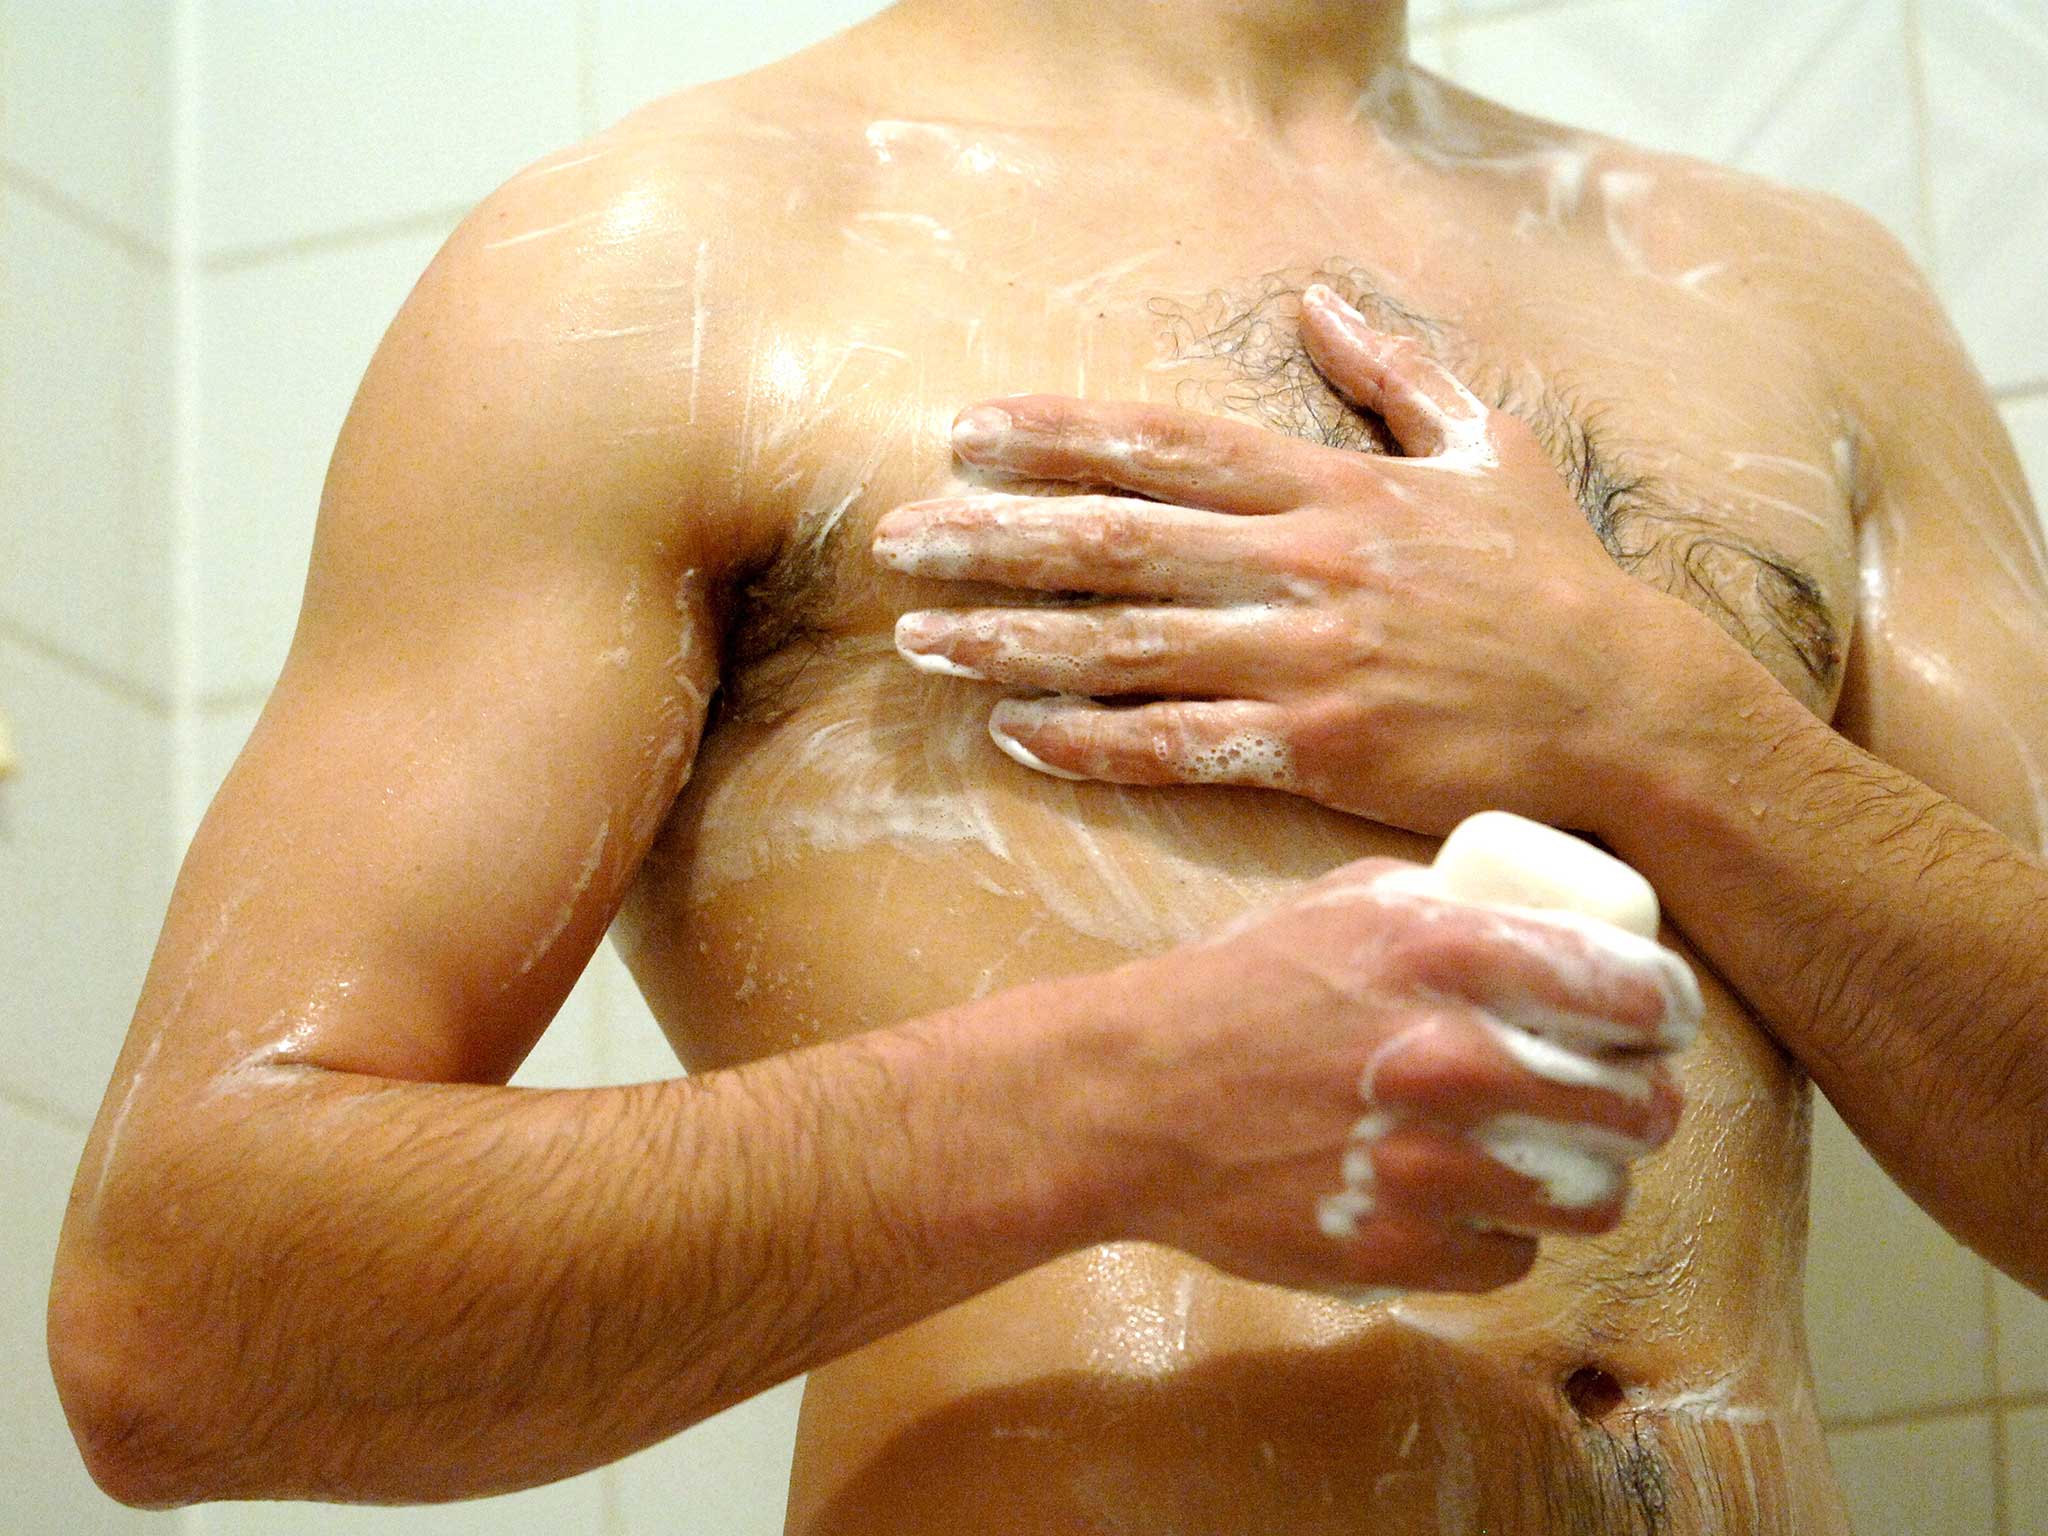 Most shower gels contain anti-bacterial chemicals